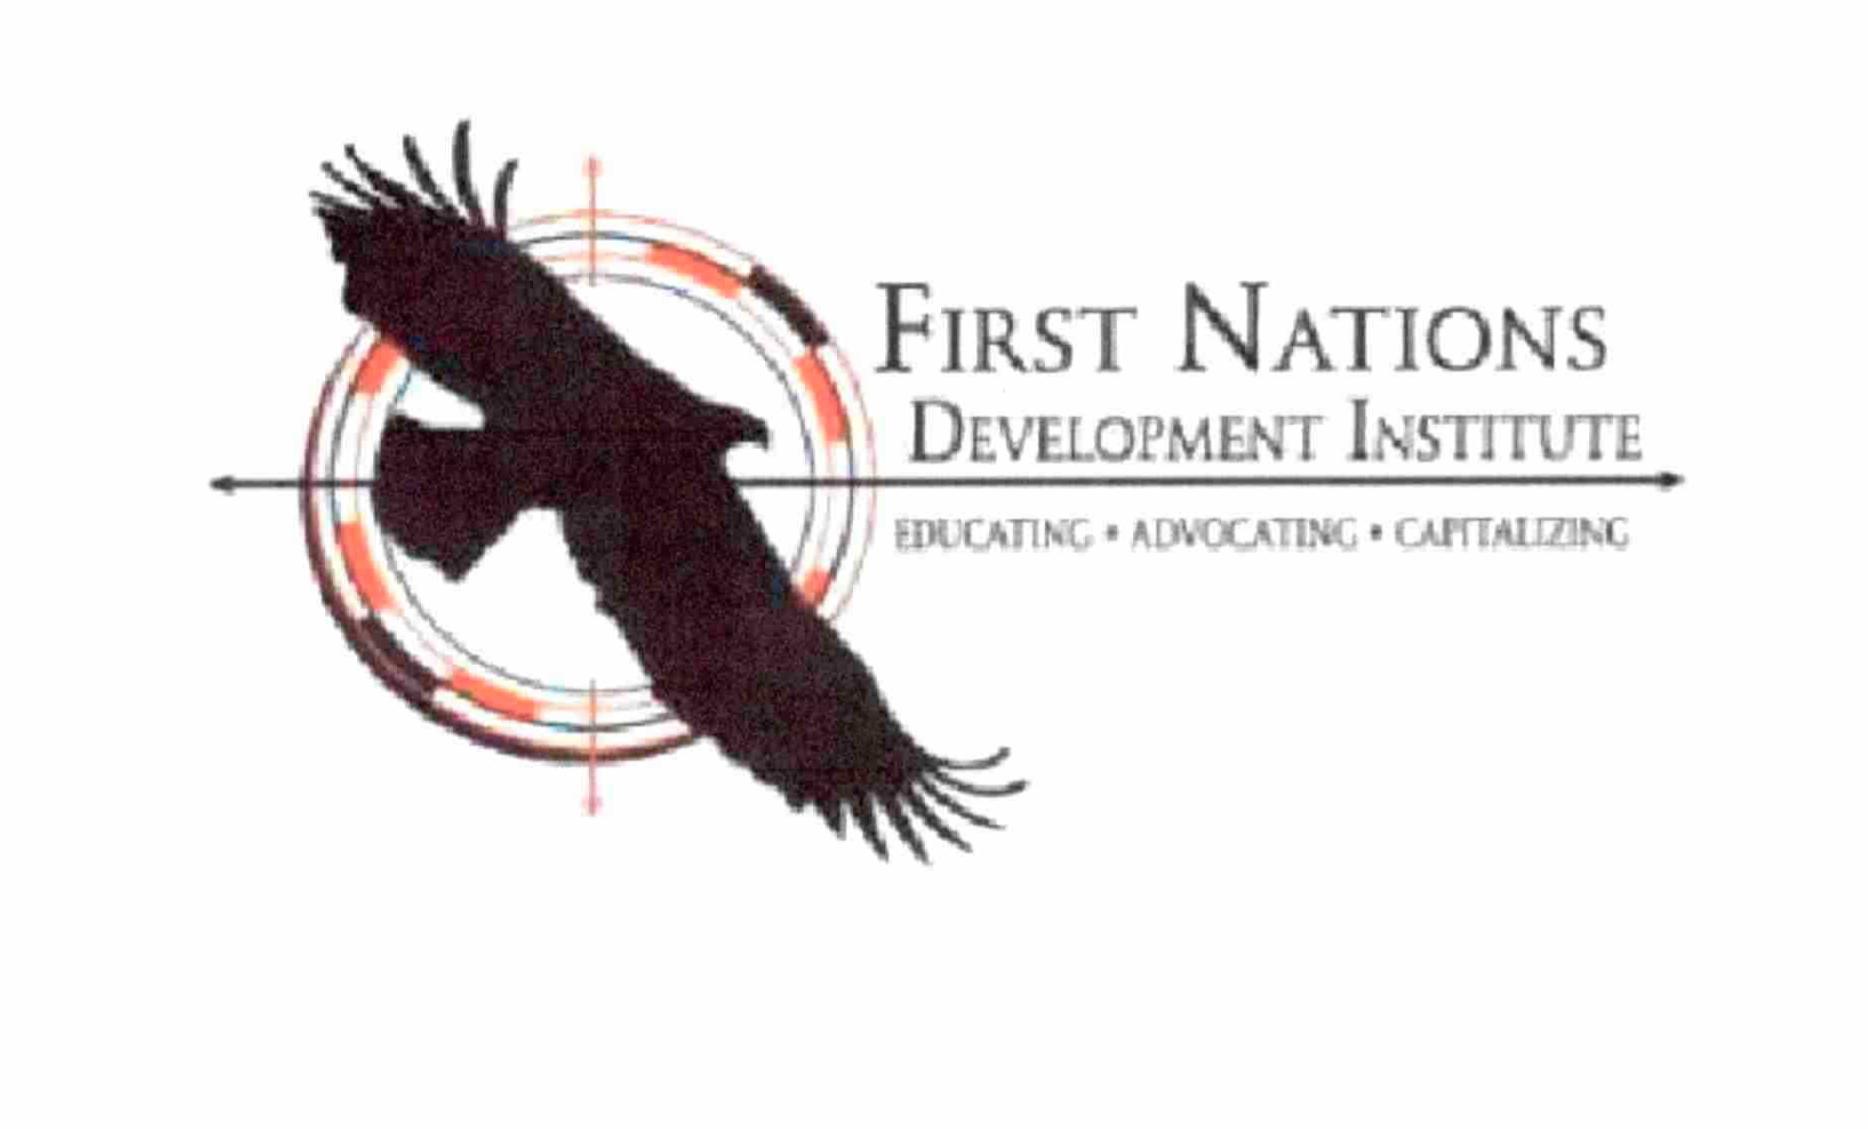  FIRST NATIONS DEVELOPMENT INSTITUTE EDUCATING Â· ADVOCATING Â· CAPITALIZING